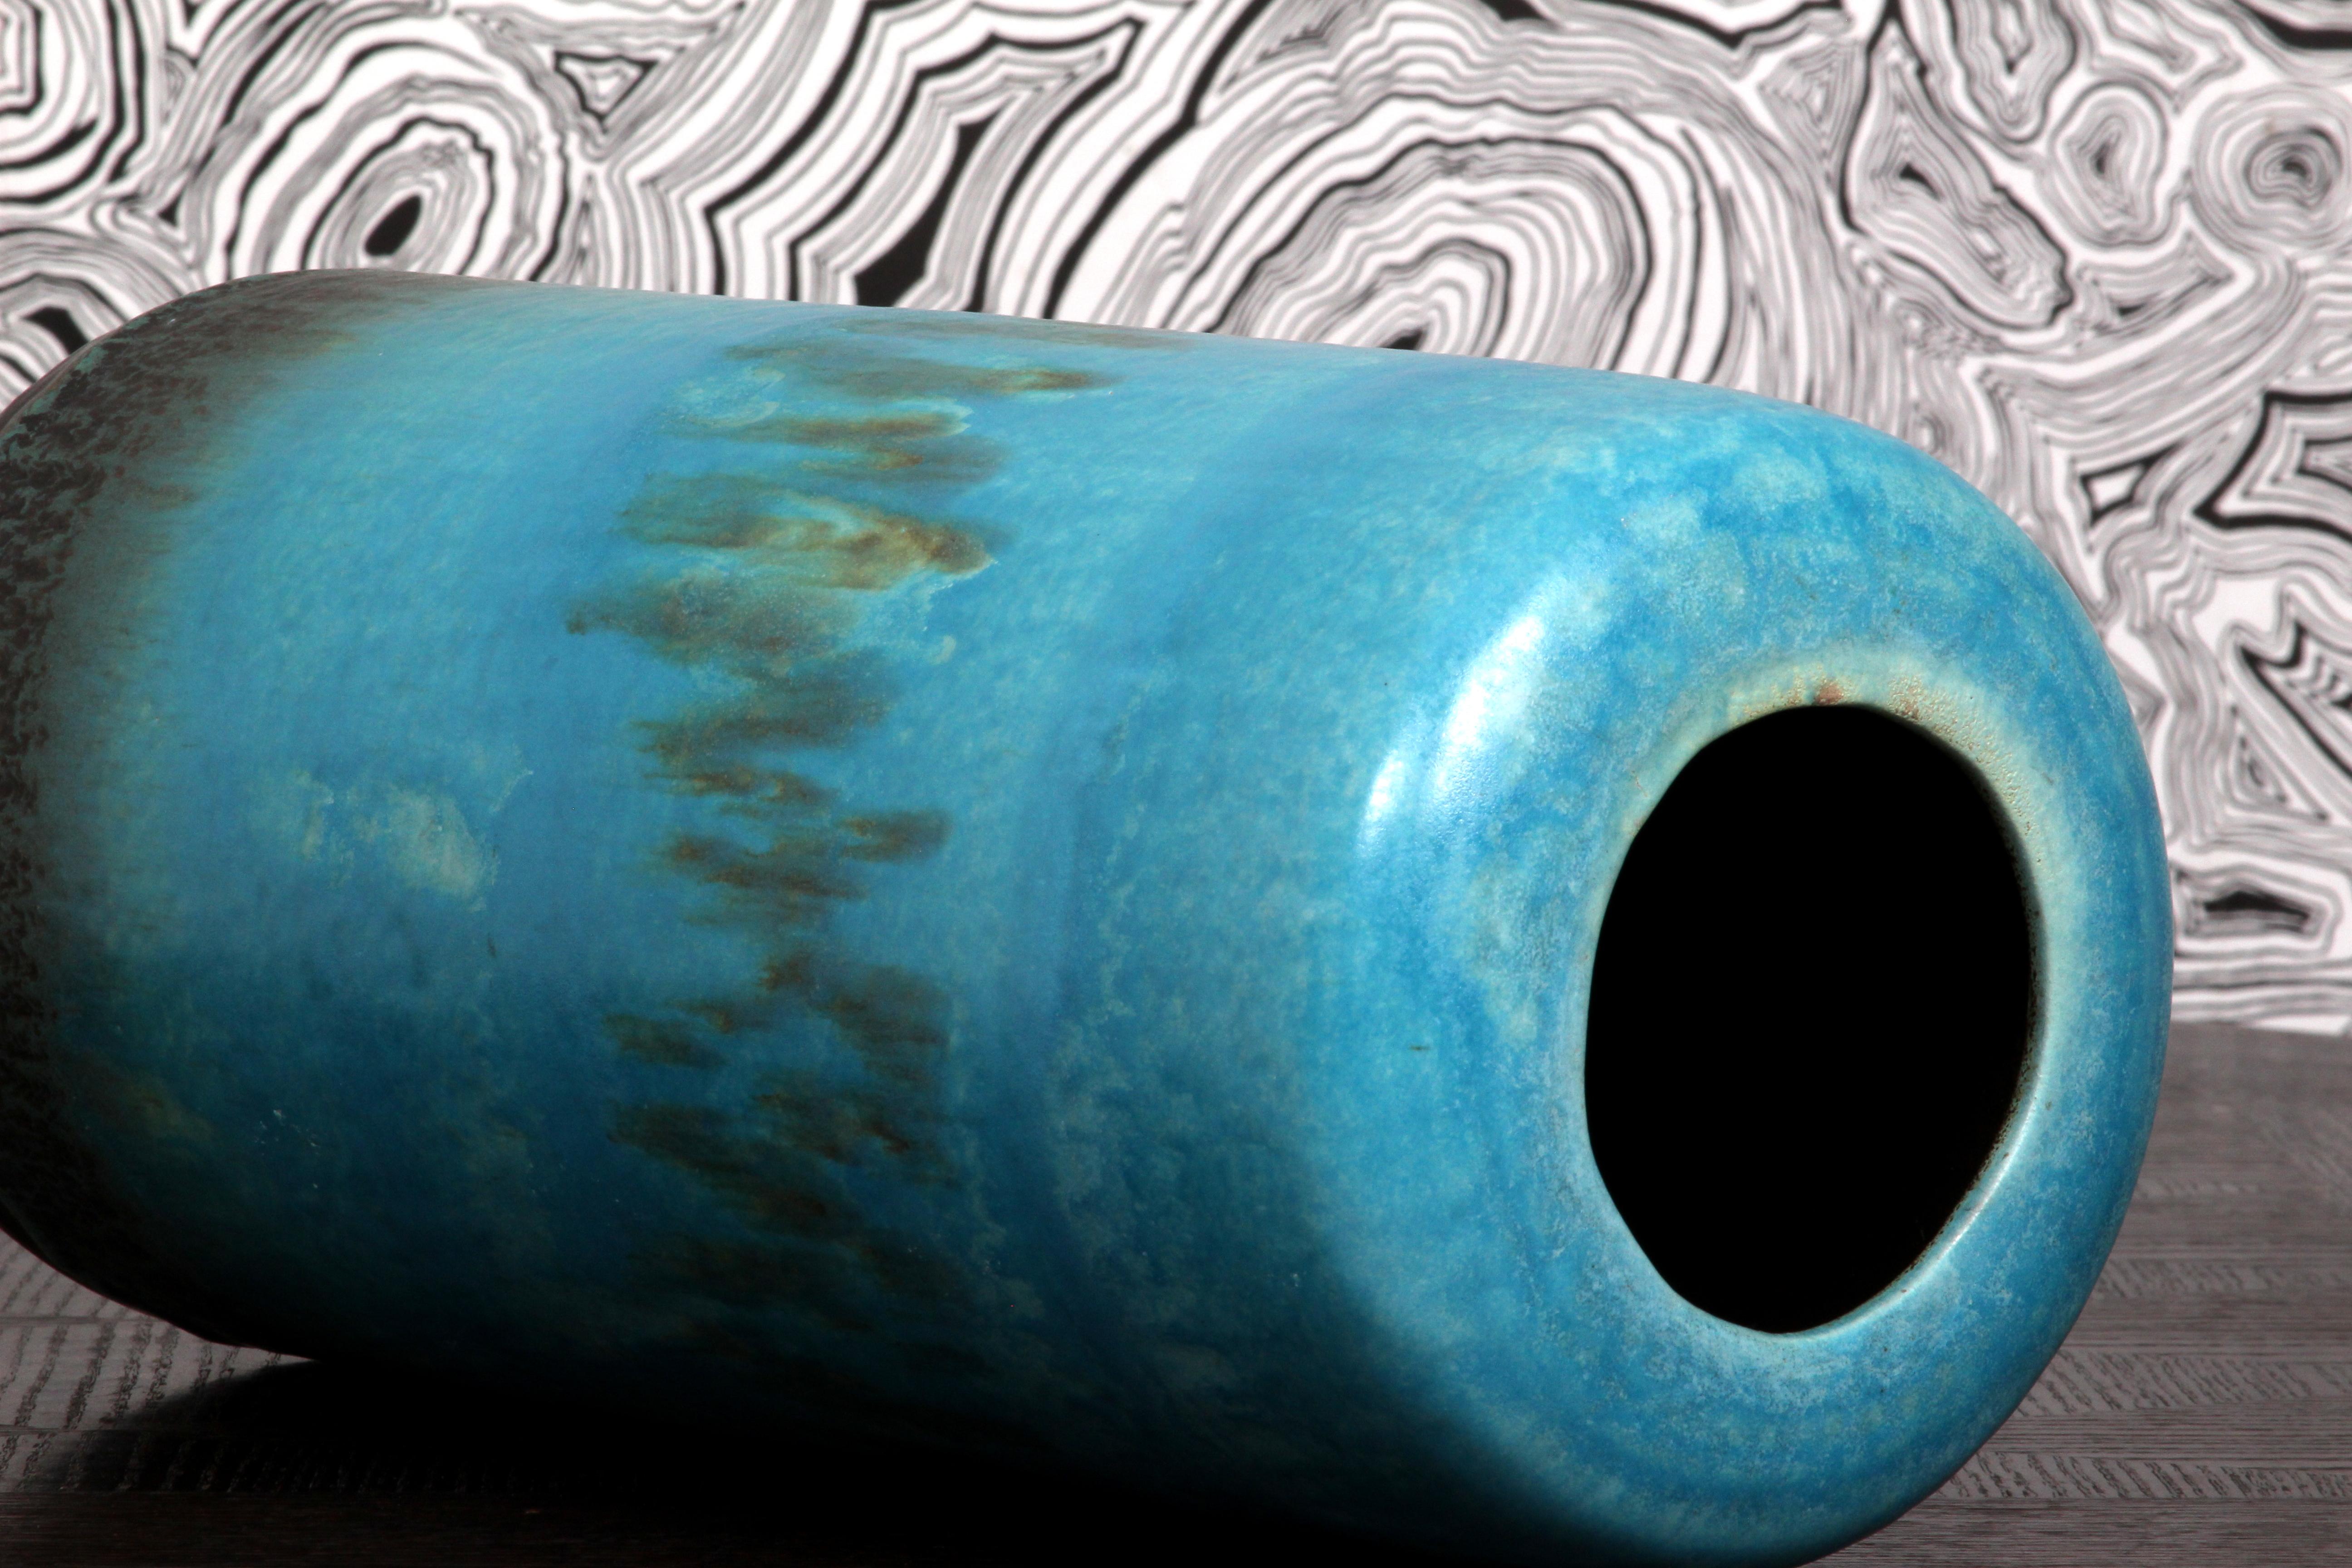 Pottery turquoise lava glazed RUSCHA FLOOR VASE 60s 70s  hand-thrown marked G.- 863-40  For Sale